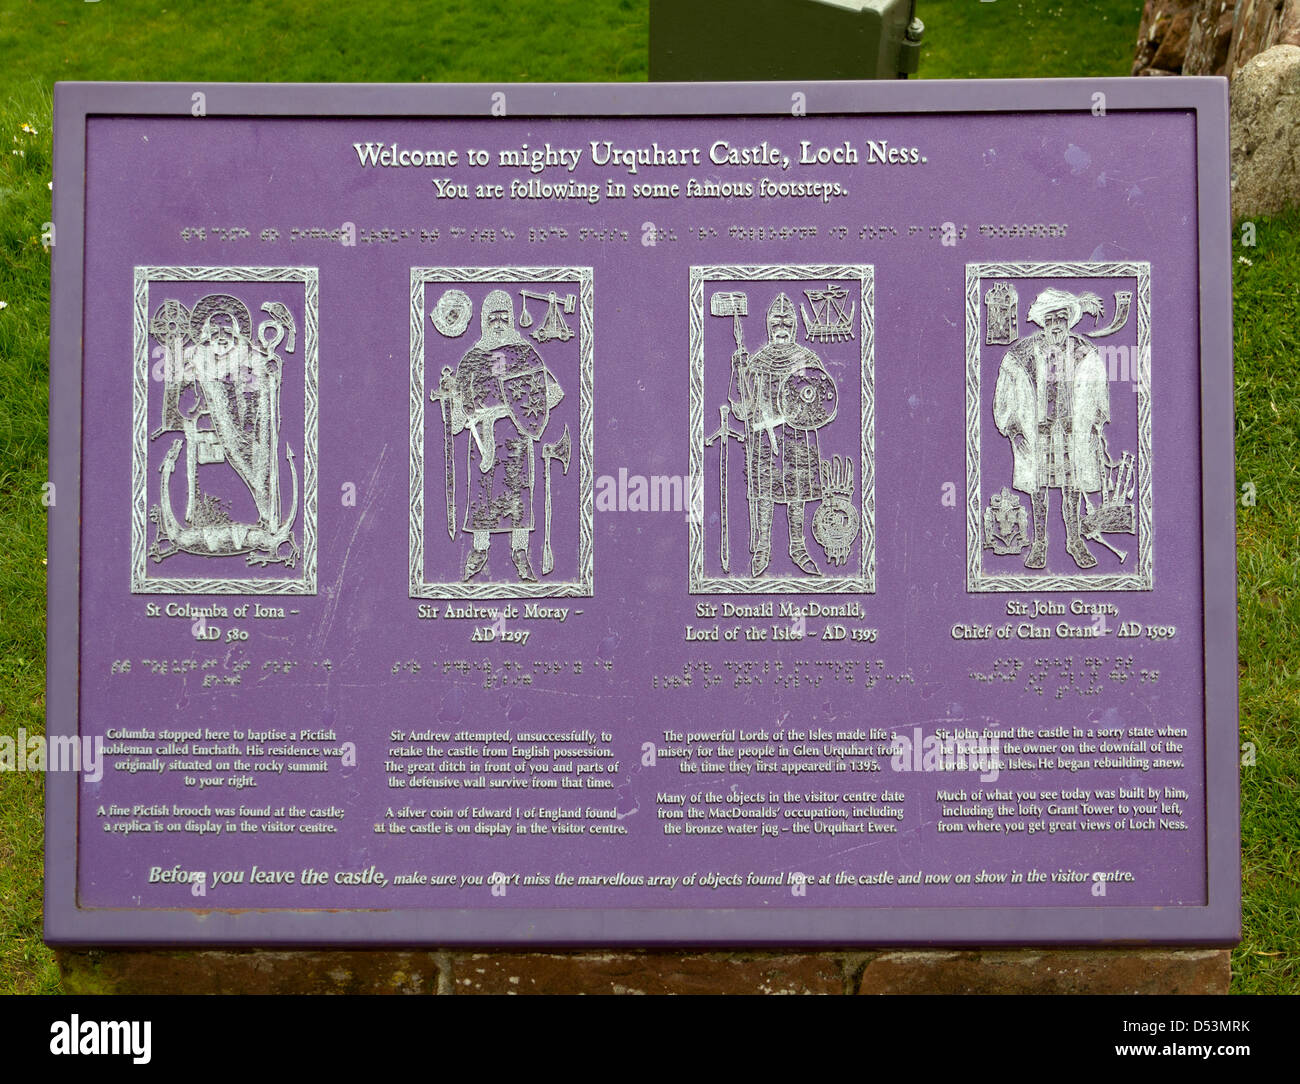 The plaque highlighting some influential people in the history of the historical Urquhart Castle in Scotland Stock Photo